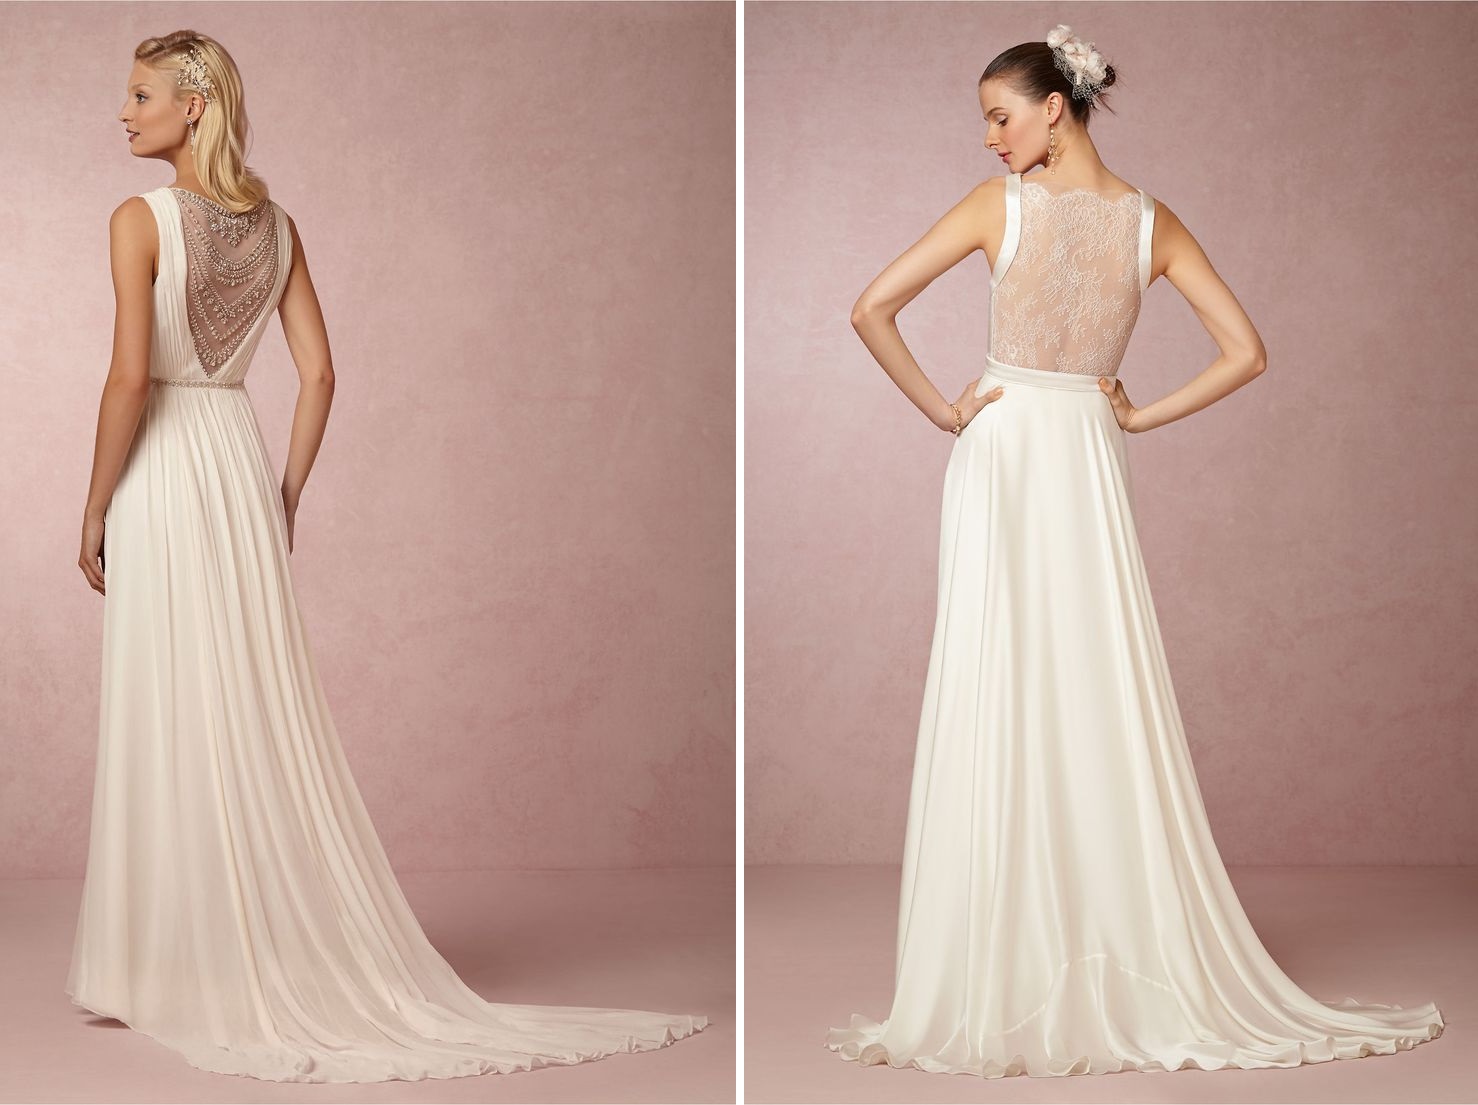 Millie & Angel Wedding Dresses from BHLDNs Spring 2015 Bridal Collection